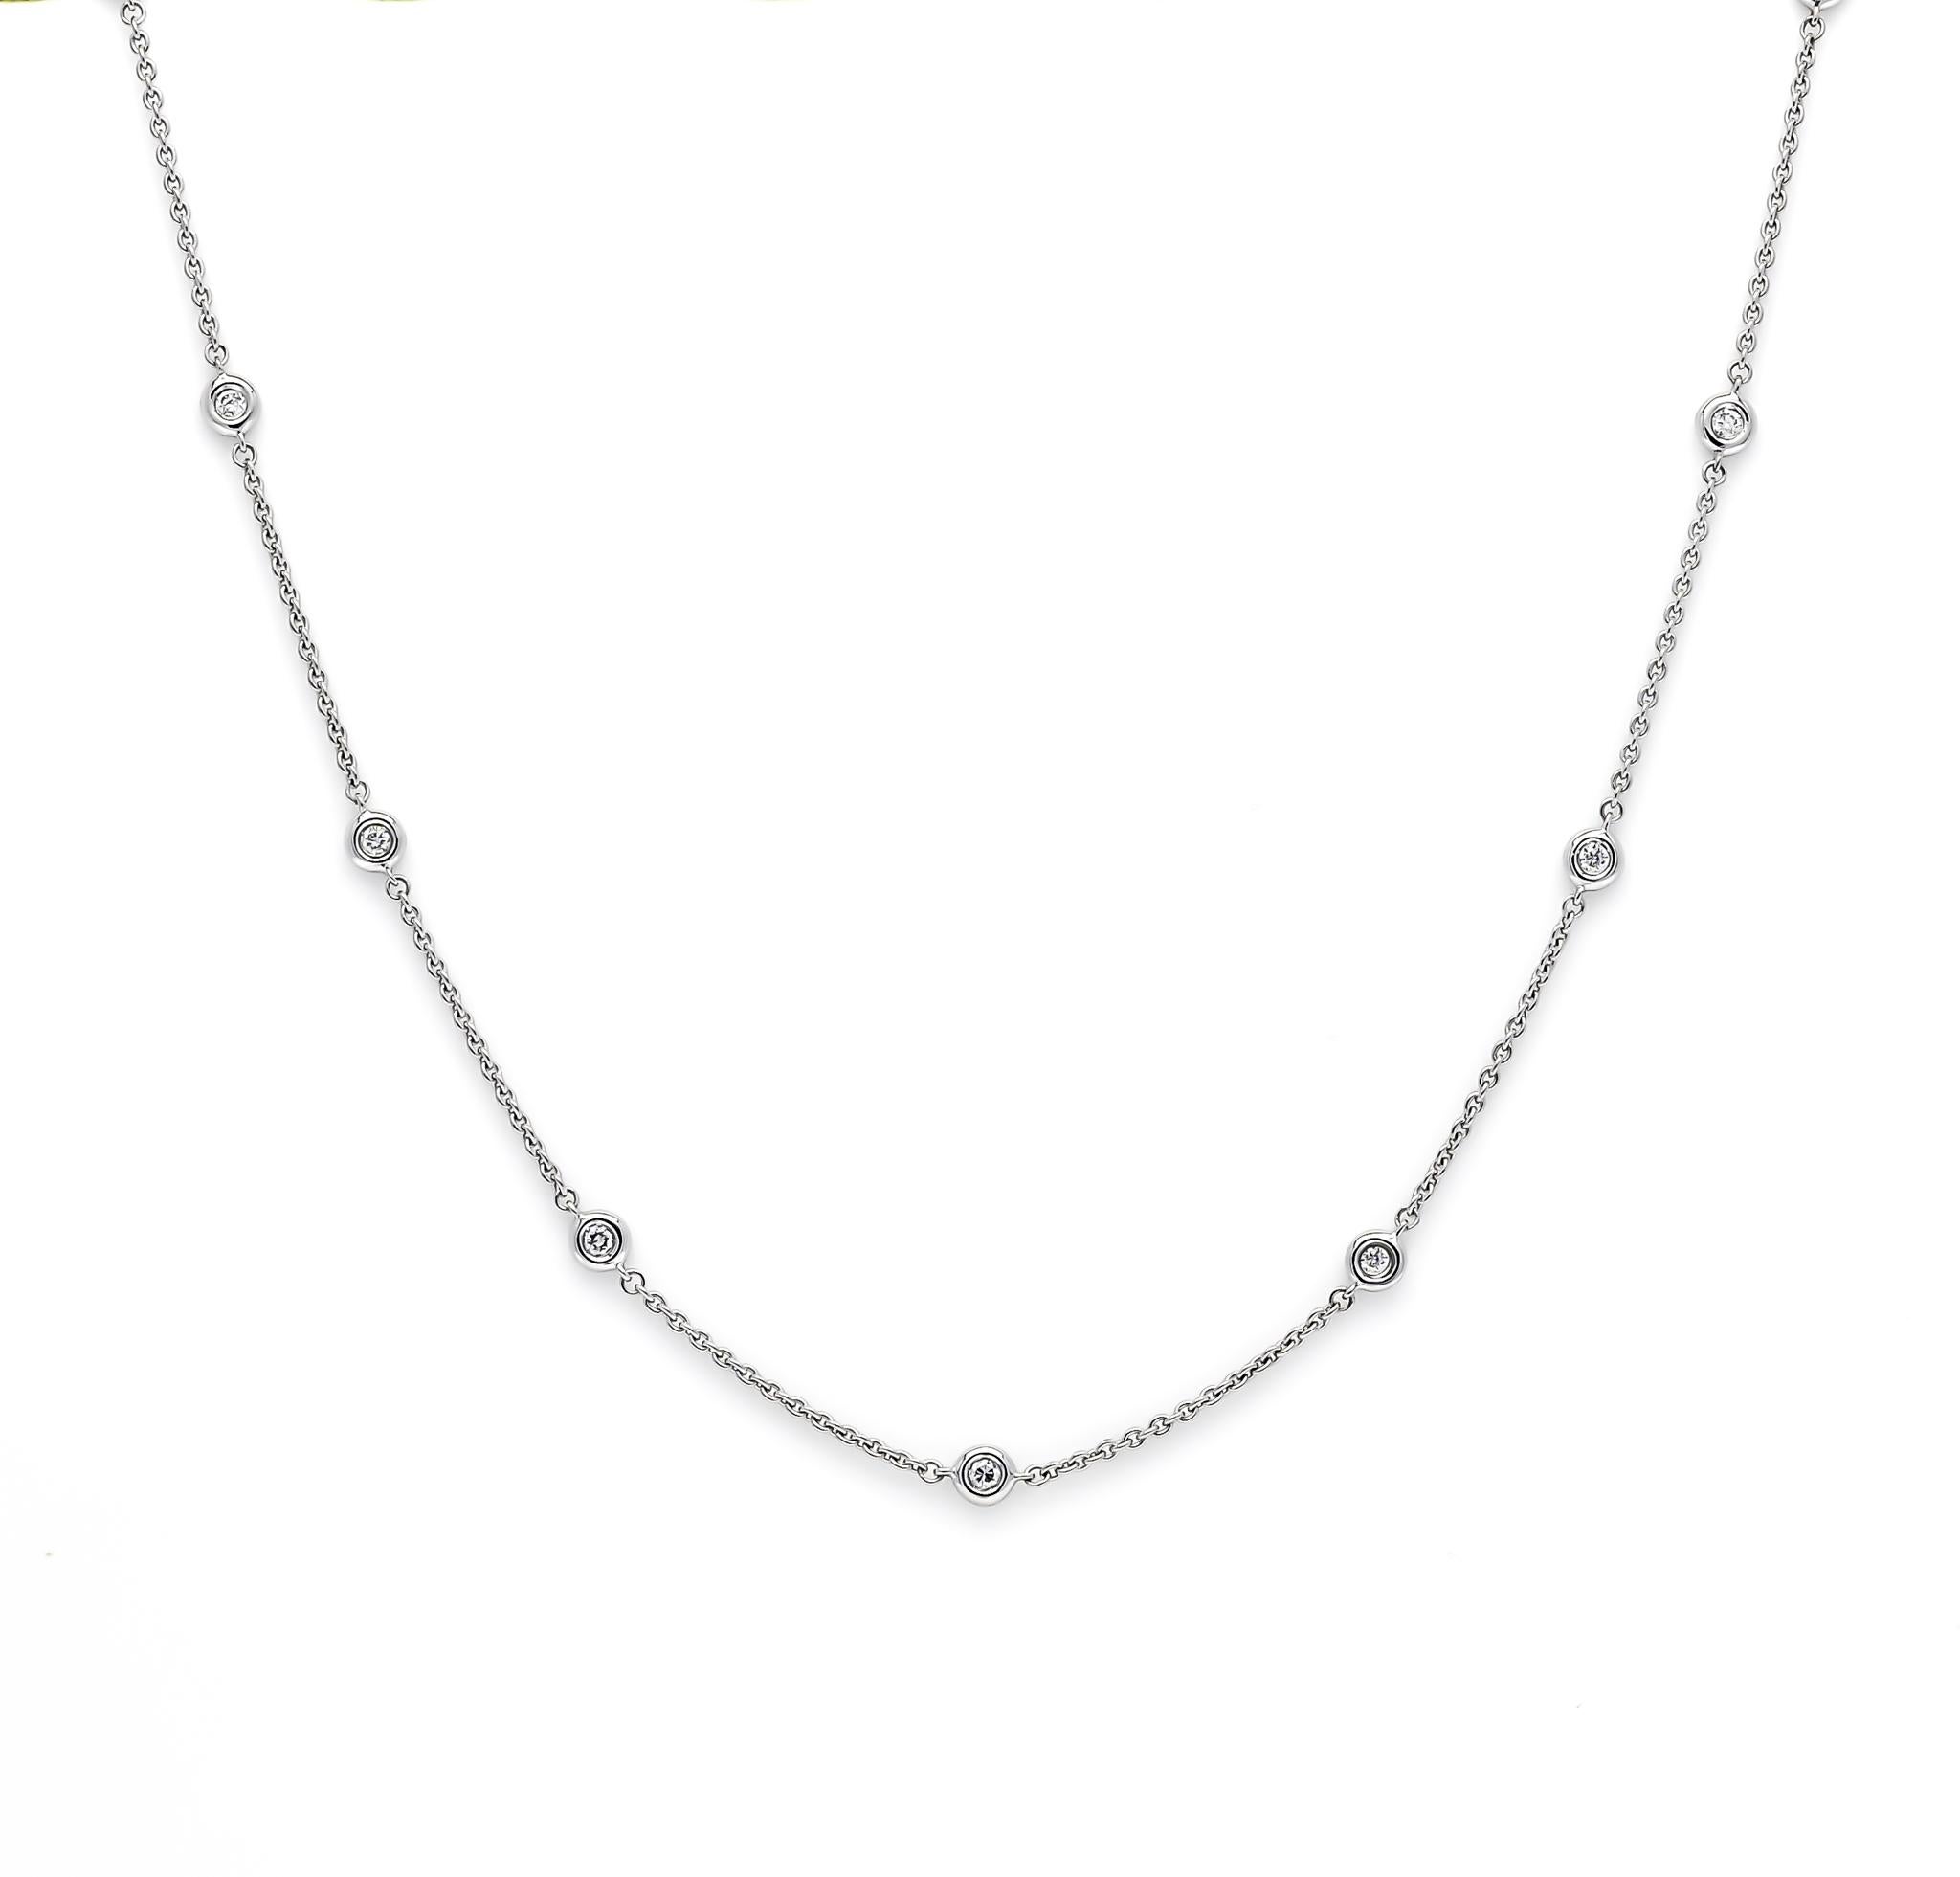 Indulge in the epitome of luxury with our Dazzling Diamond Sparkle, captured with unparalleled elegance and enchantment in an 18 Karat White Gold Bezel Set Chain Necklace. This extraordinary piece showcases a resplendent round-cut diamond, weighing